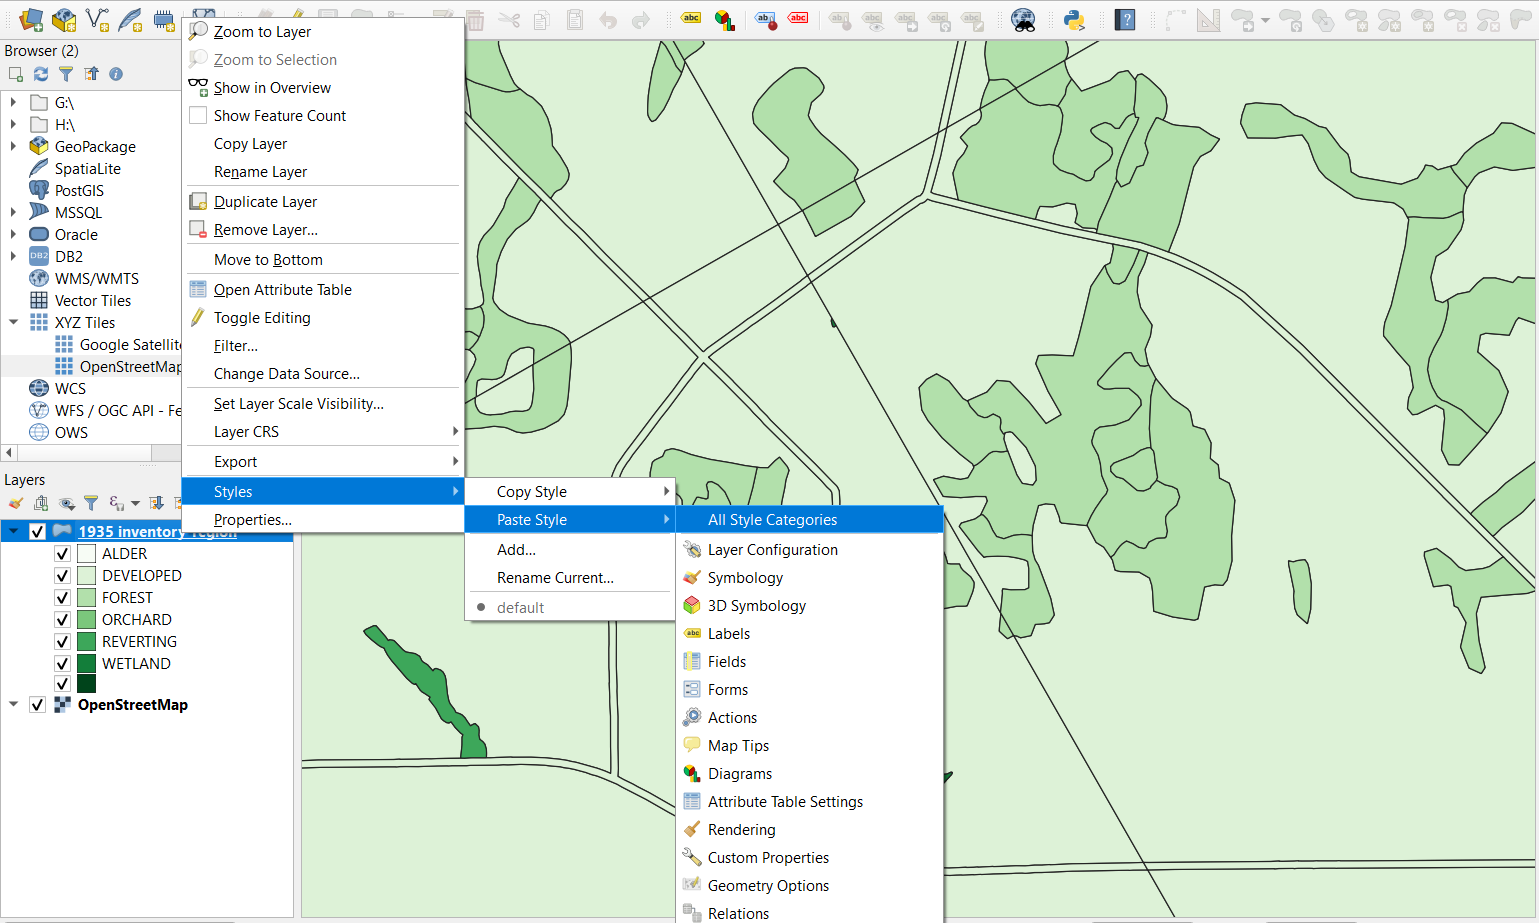 Figure 2.111. This image shows the QGIS window with the 1935 inventory layer selected, with a pop-up where the second last option (Styles) is highlighted. From this first pop-up stems a second pop-up where the second option (Paste Style) is highlighted. The final pop-up that stems from the second has the first option (All Style Categories) selected.